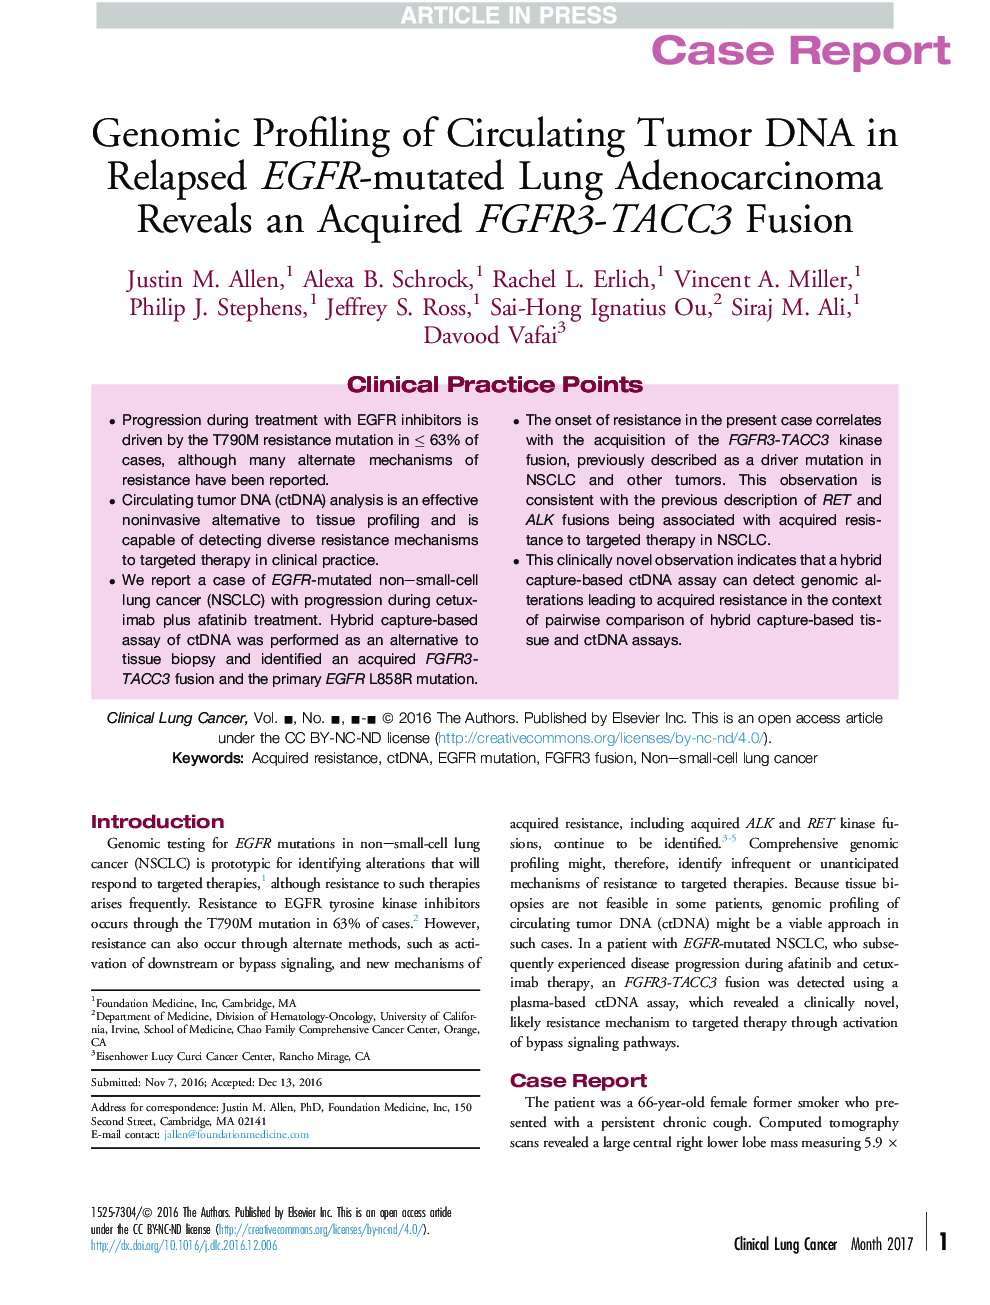 Genomic Profiling of Circulating Tumor DNA in Relapsed EGFR-mutated Lung Adenocarcinoma Reveals an Acquired FGFR3-TACC3 Fusion